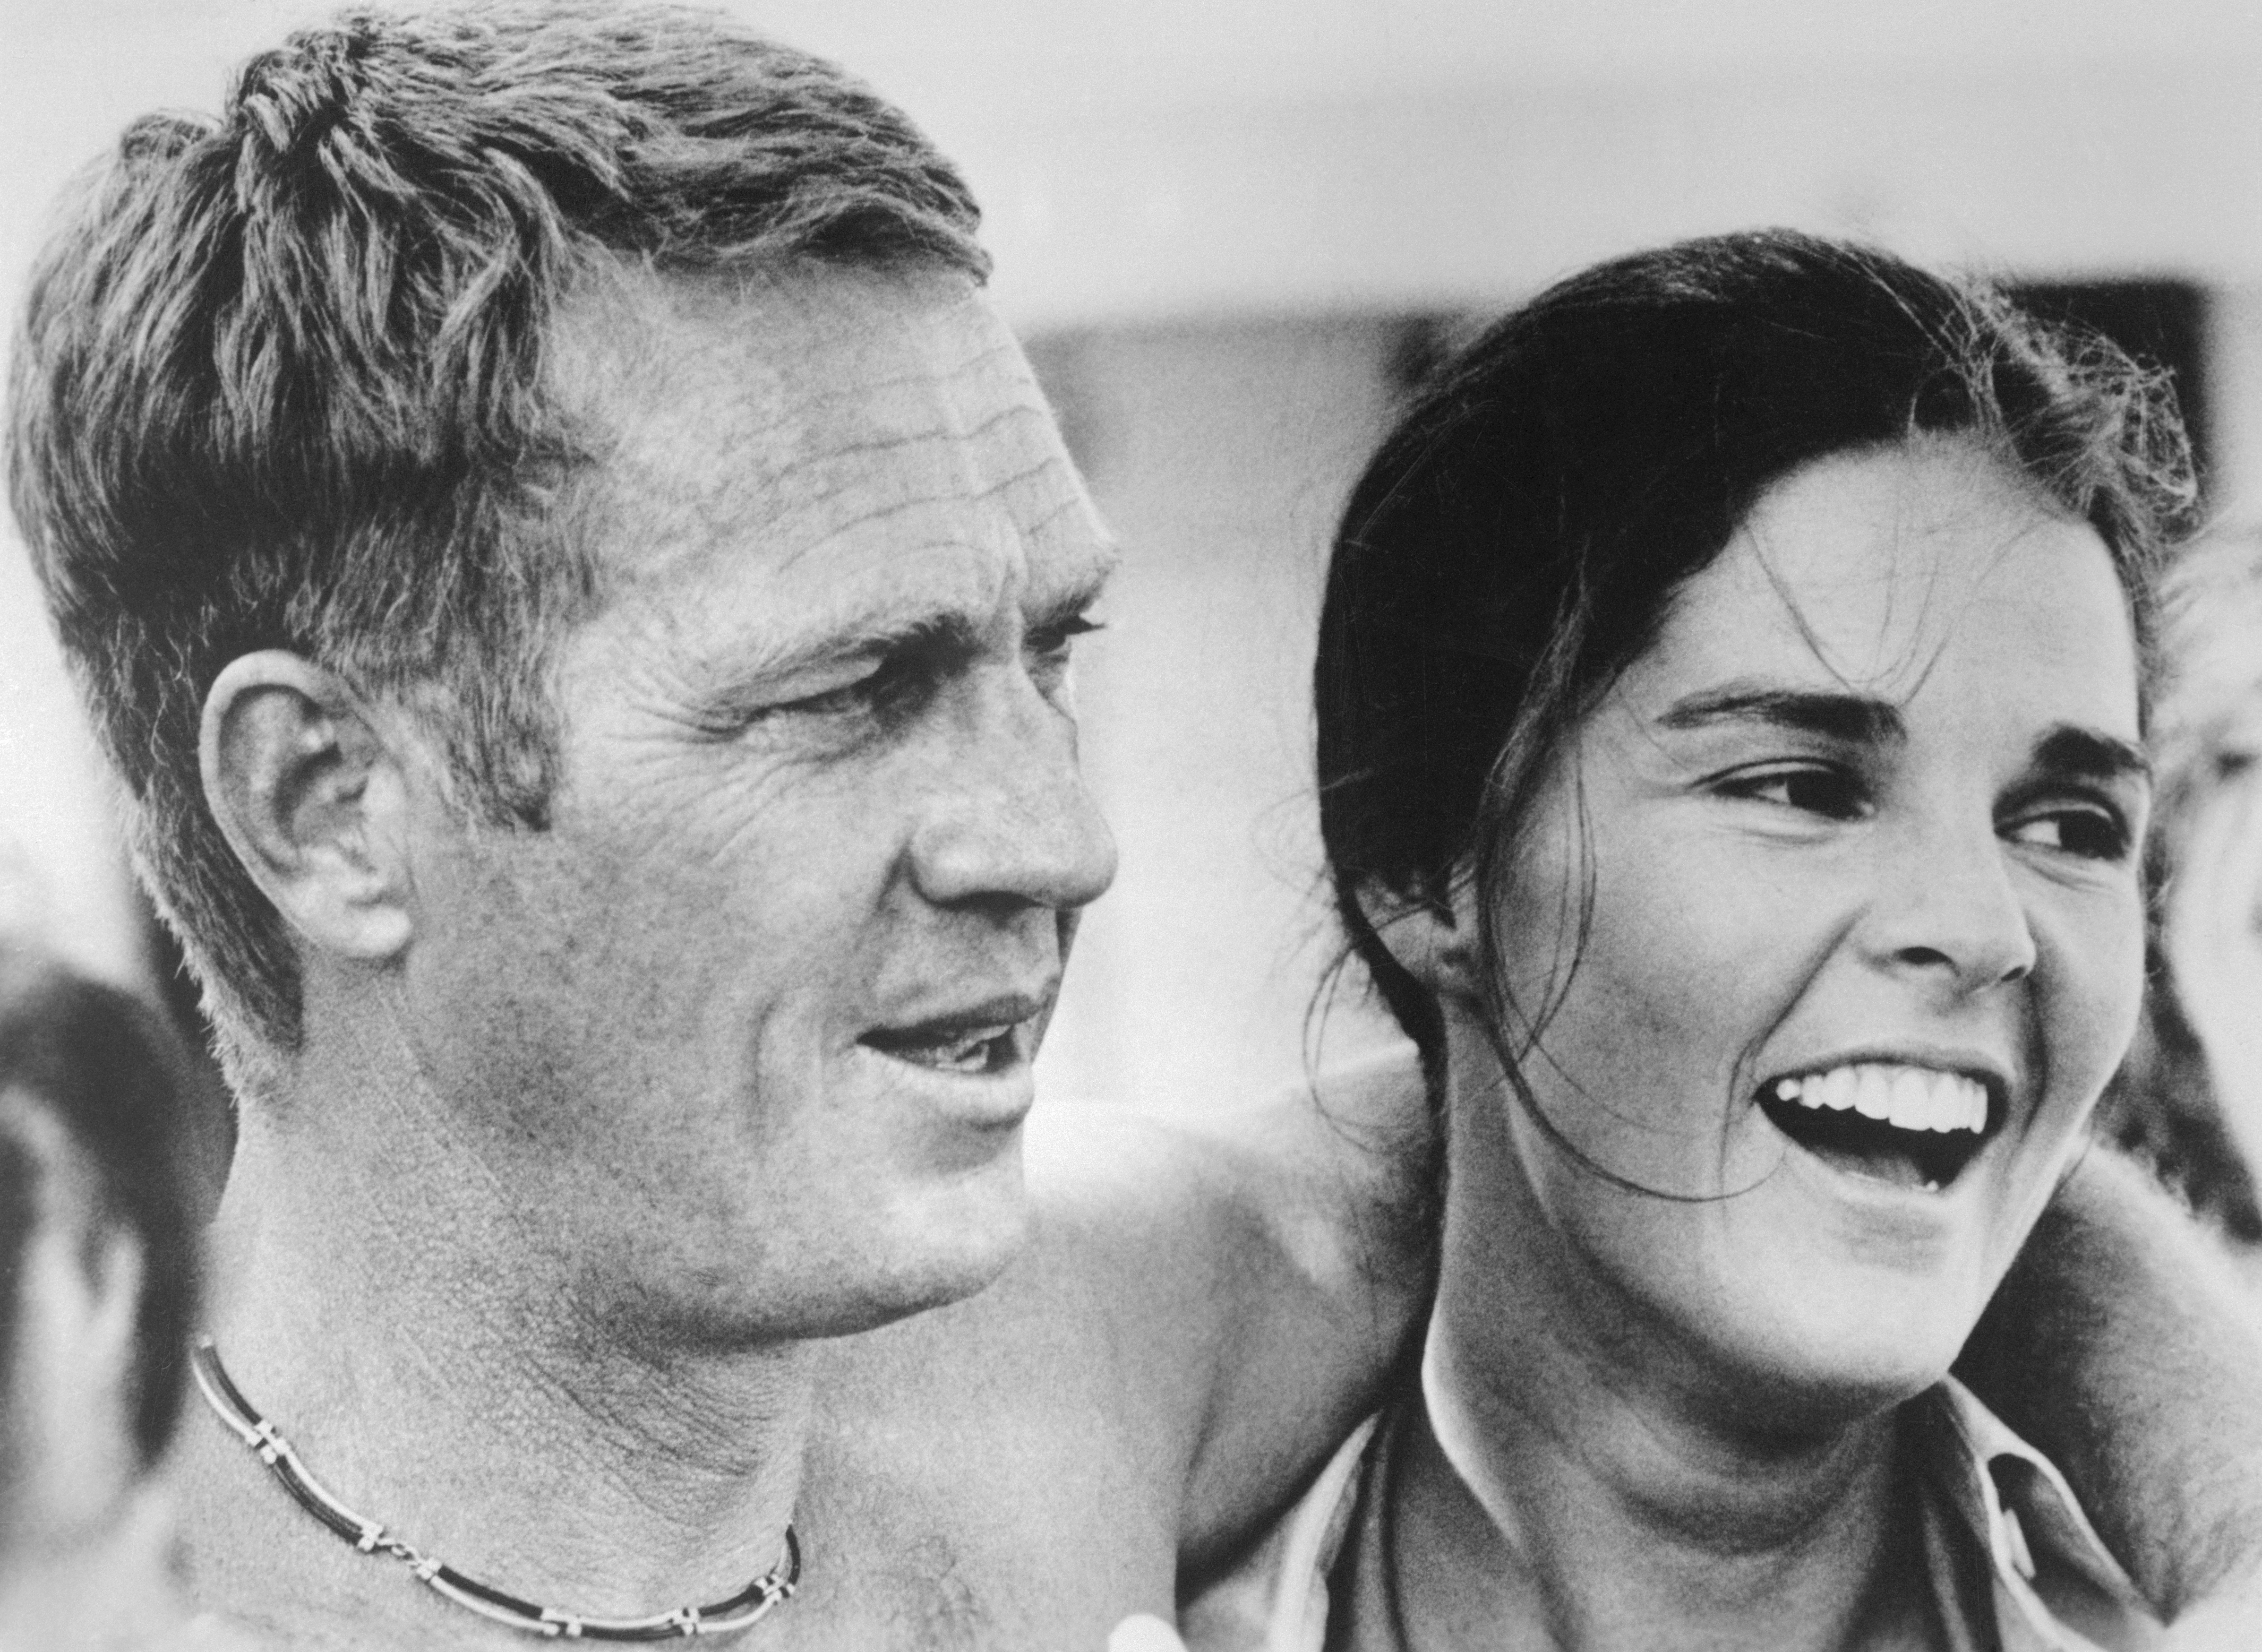 Steve McQueen and Ali MacGraw on the set of "The Getaway" in 1972 | Source: Getty Images